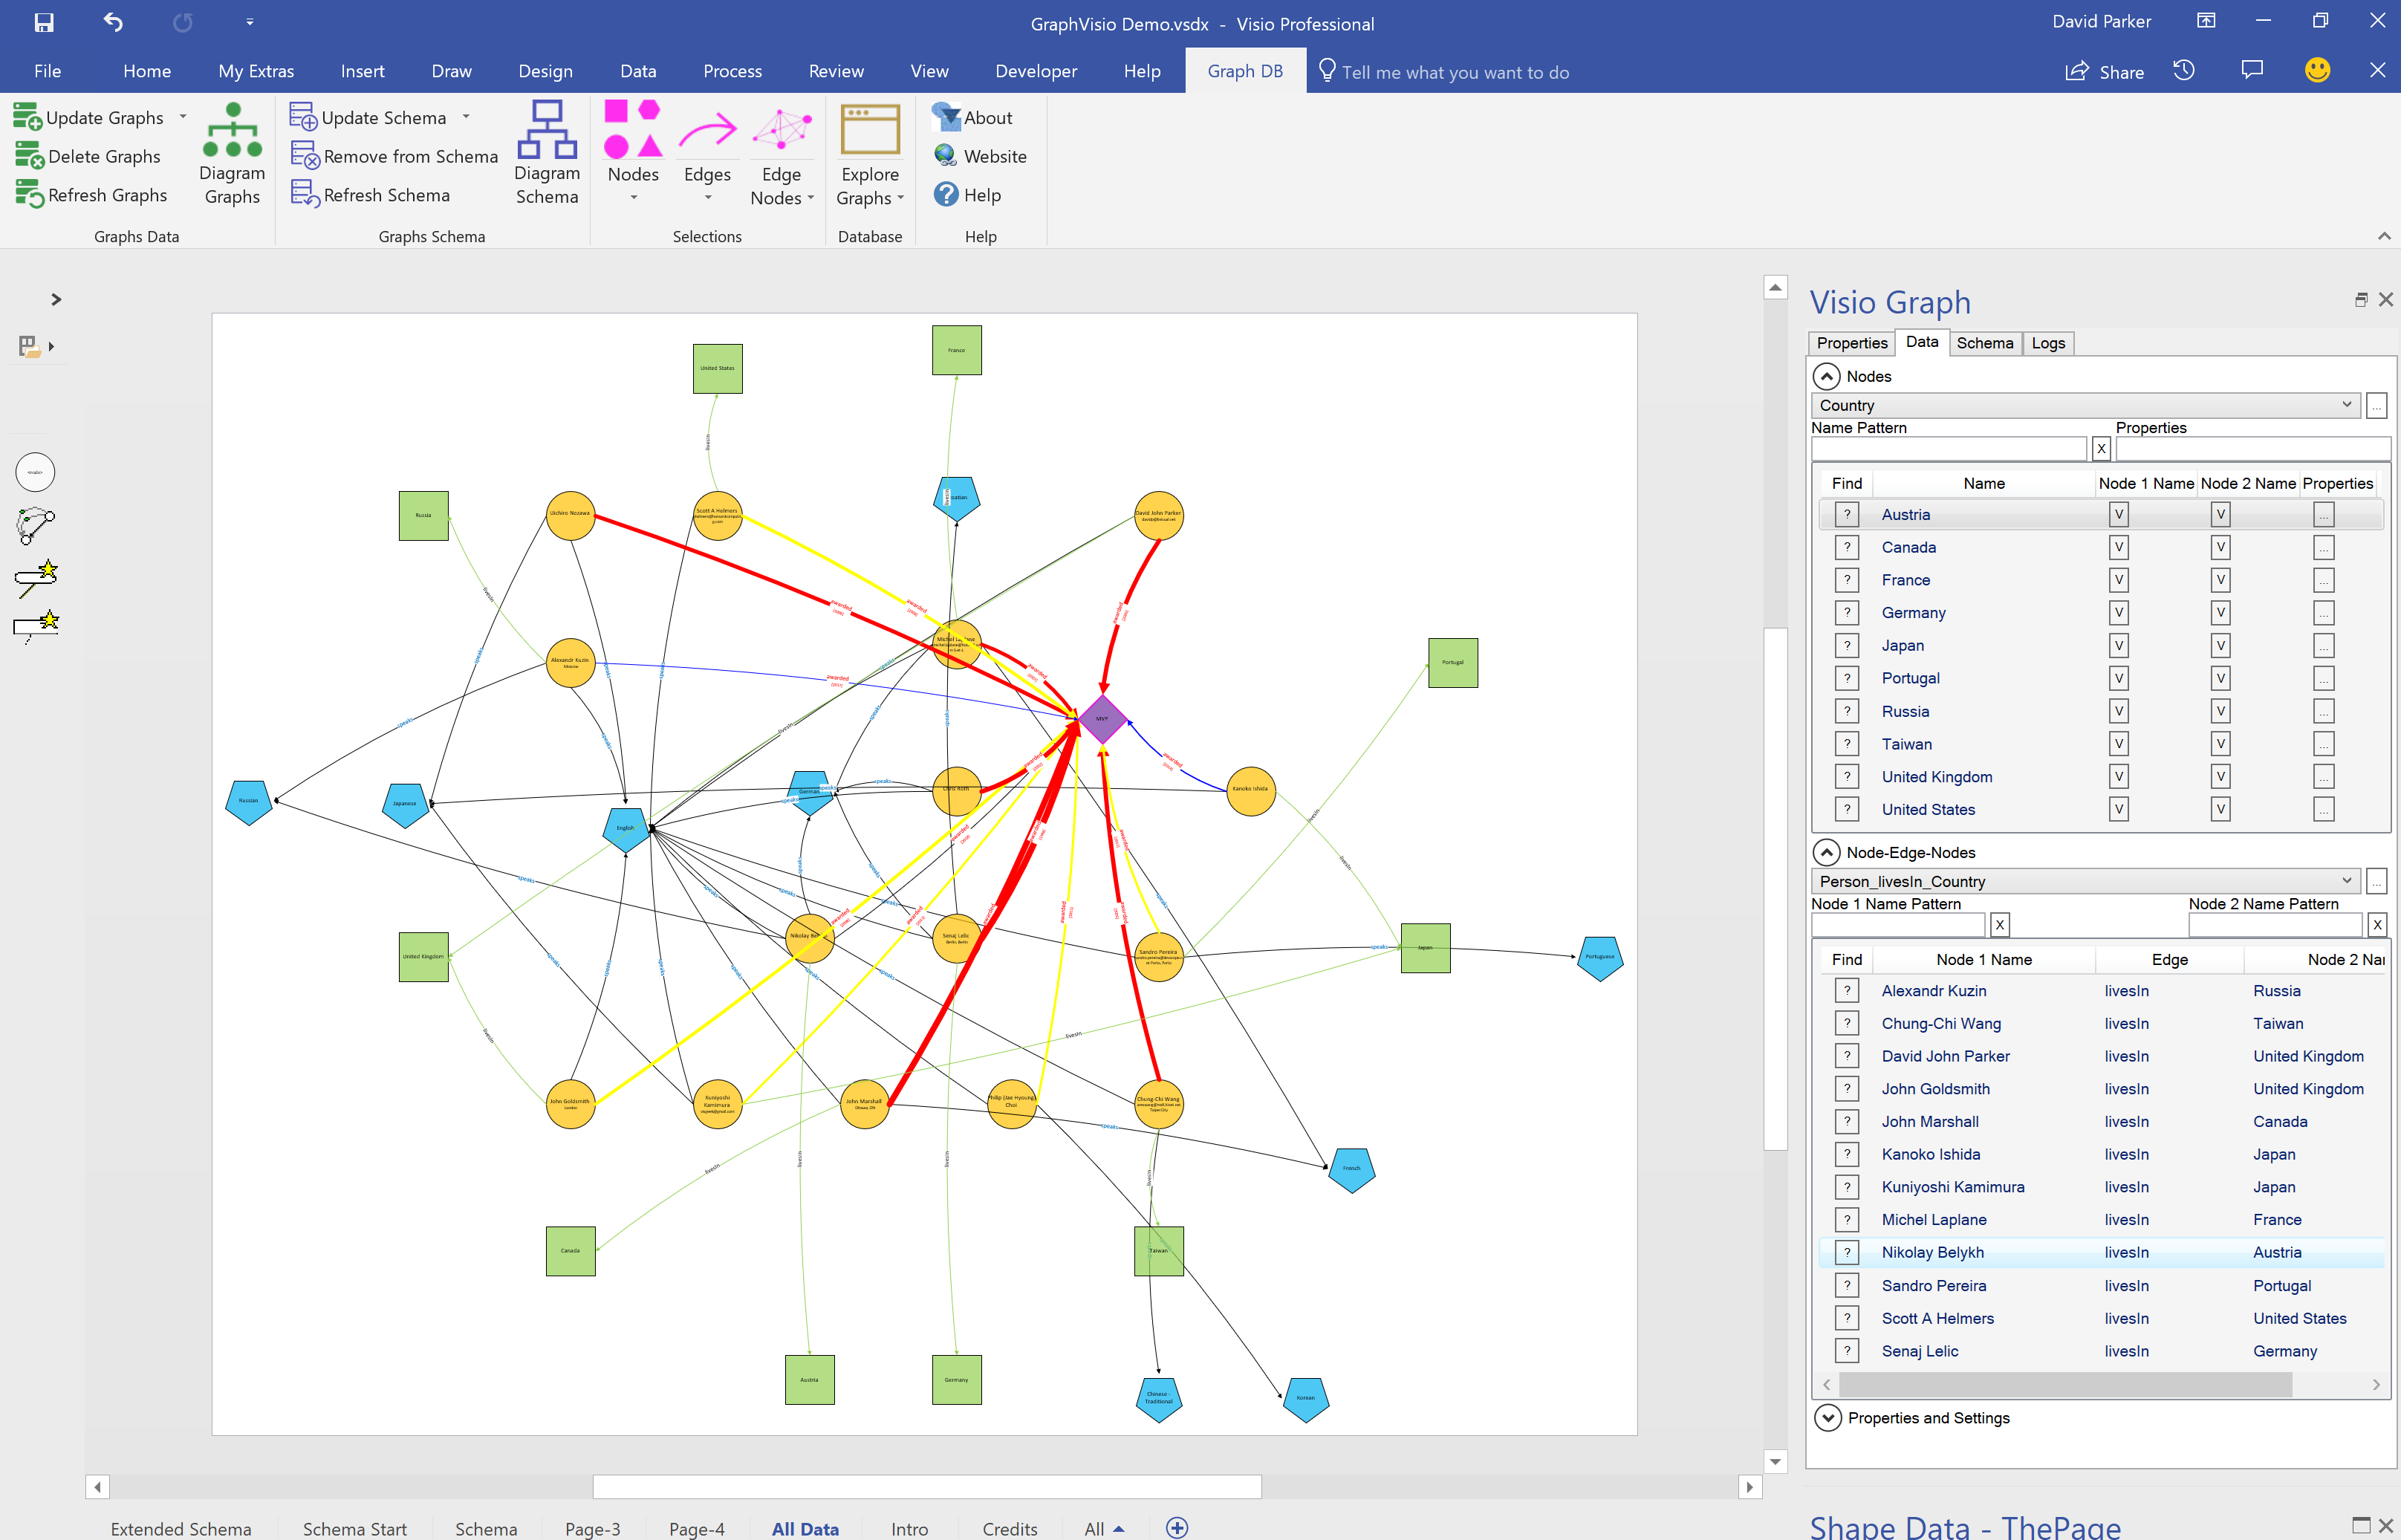 Demo of a Graph DB in Visio